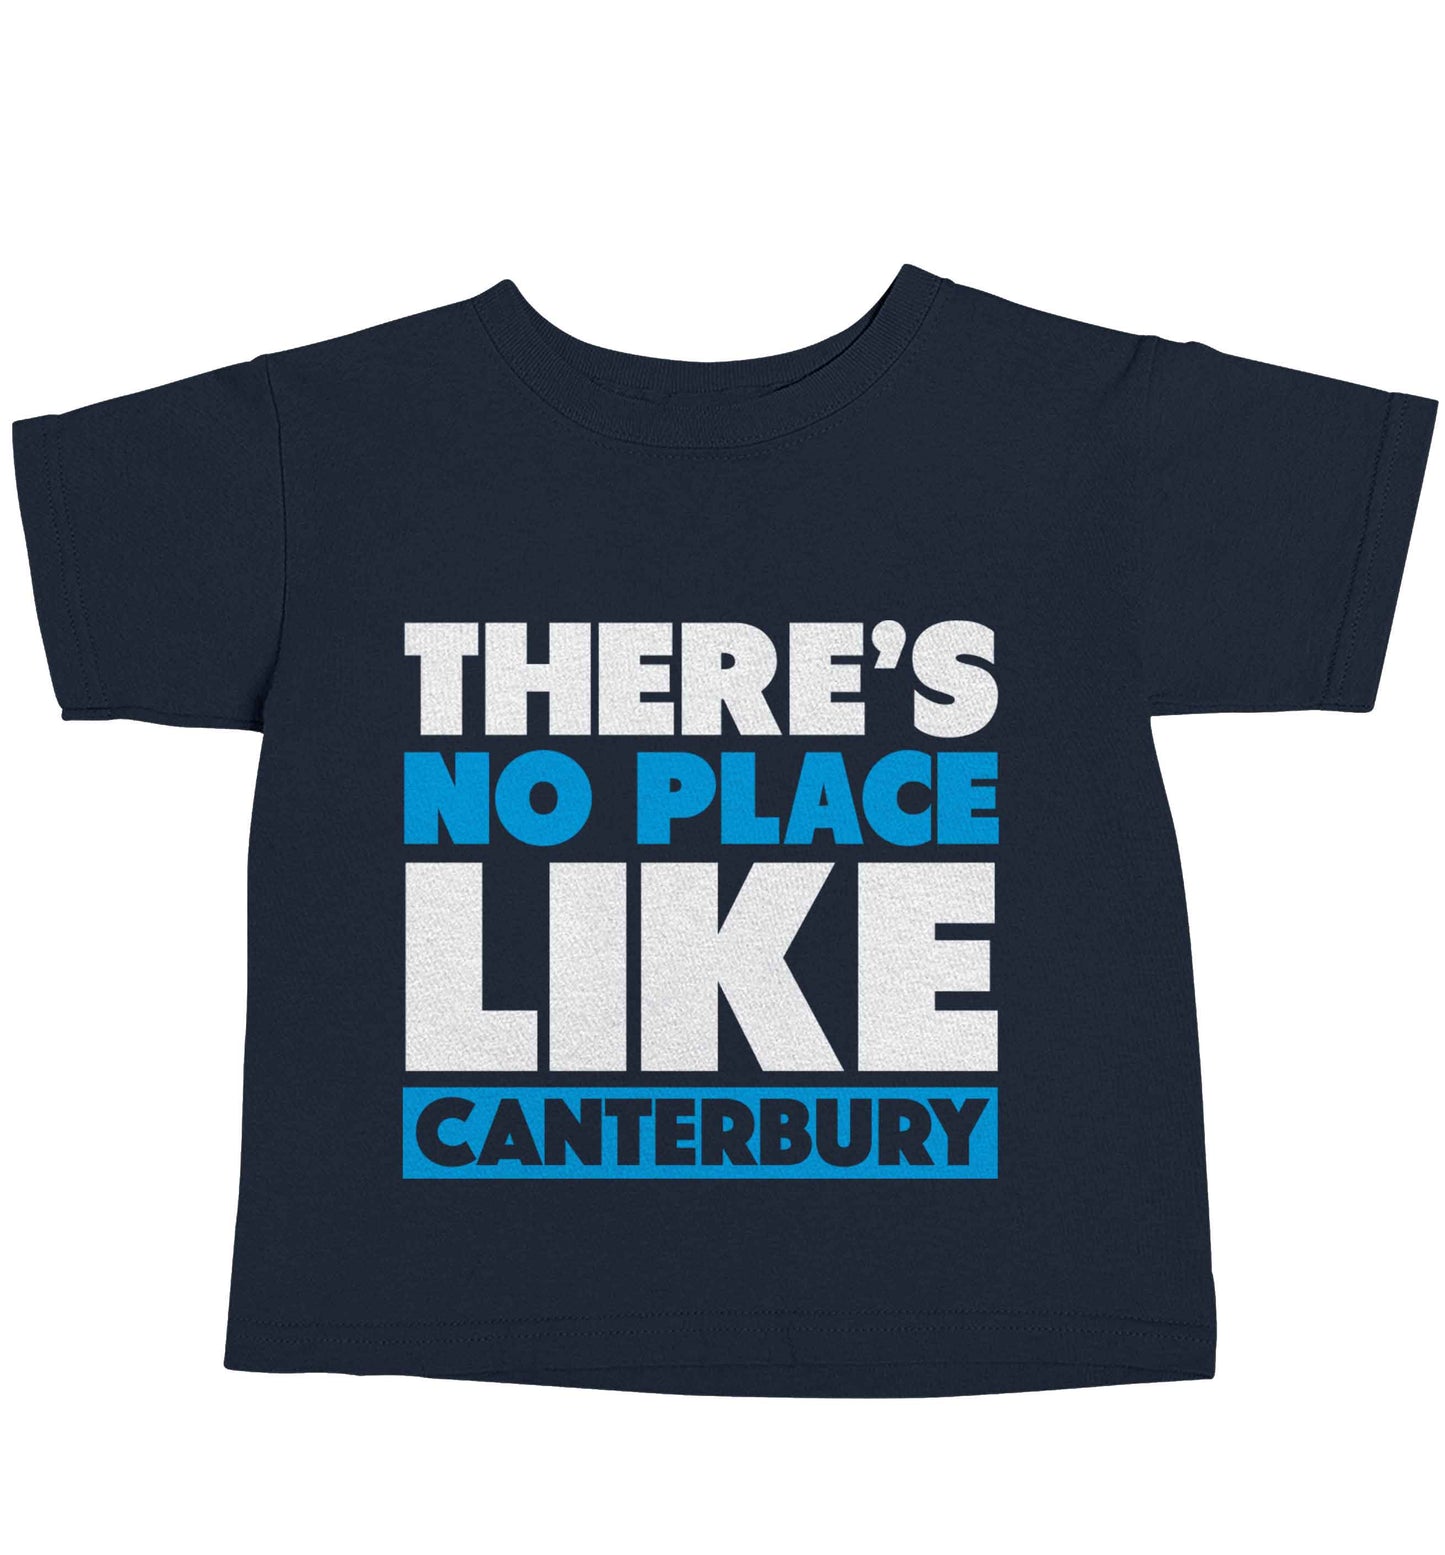 There's no place like Canterbury navy baby toddler Tshirt 2 Years